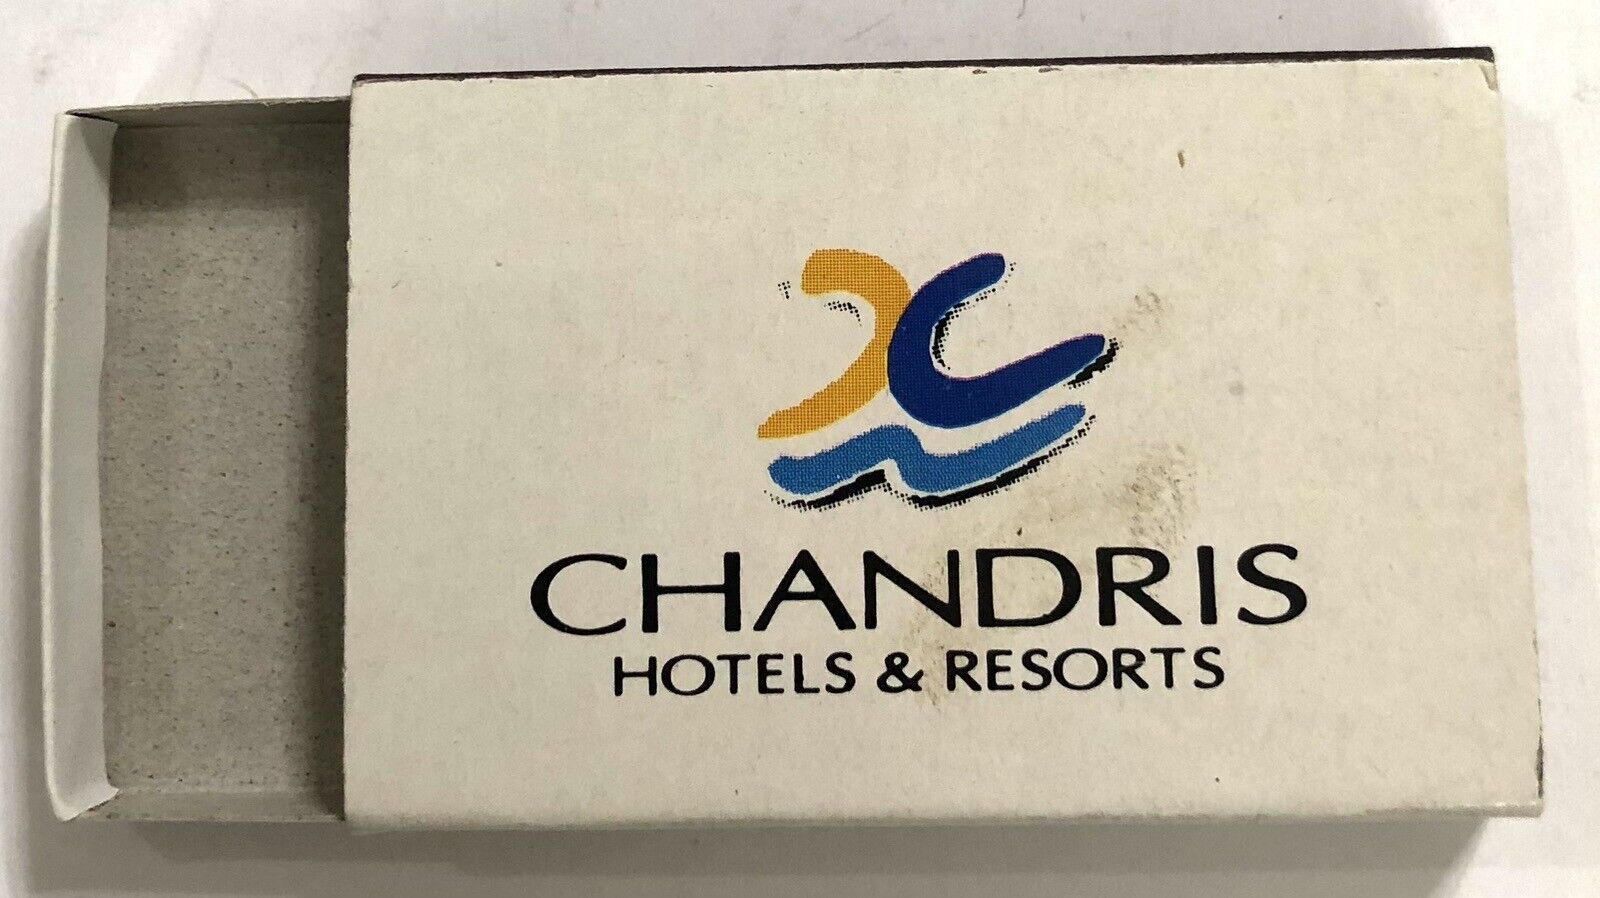 Vintage Empty Matchbook Box Cover - Chandris Hotels & Resorts Greece